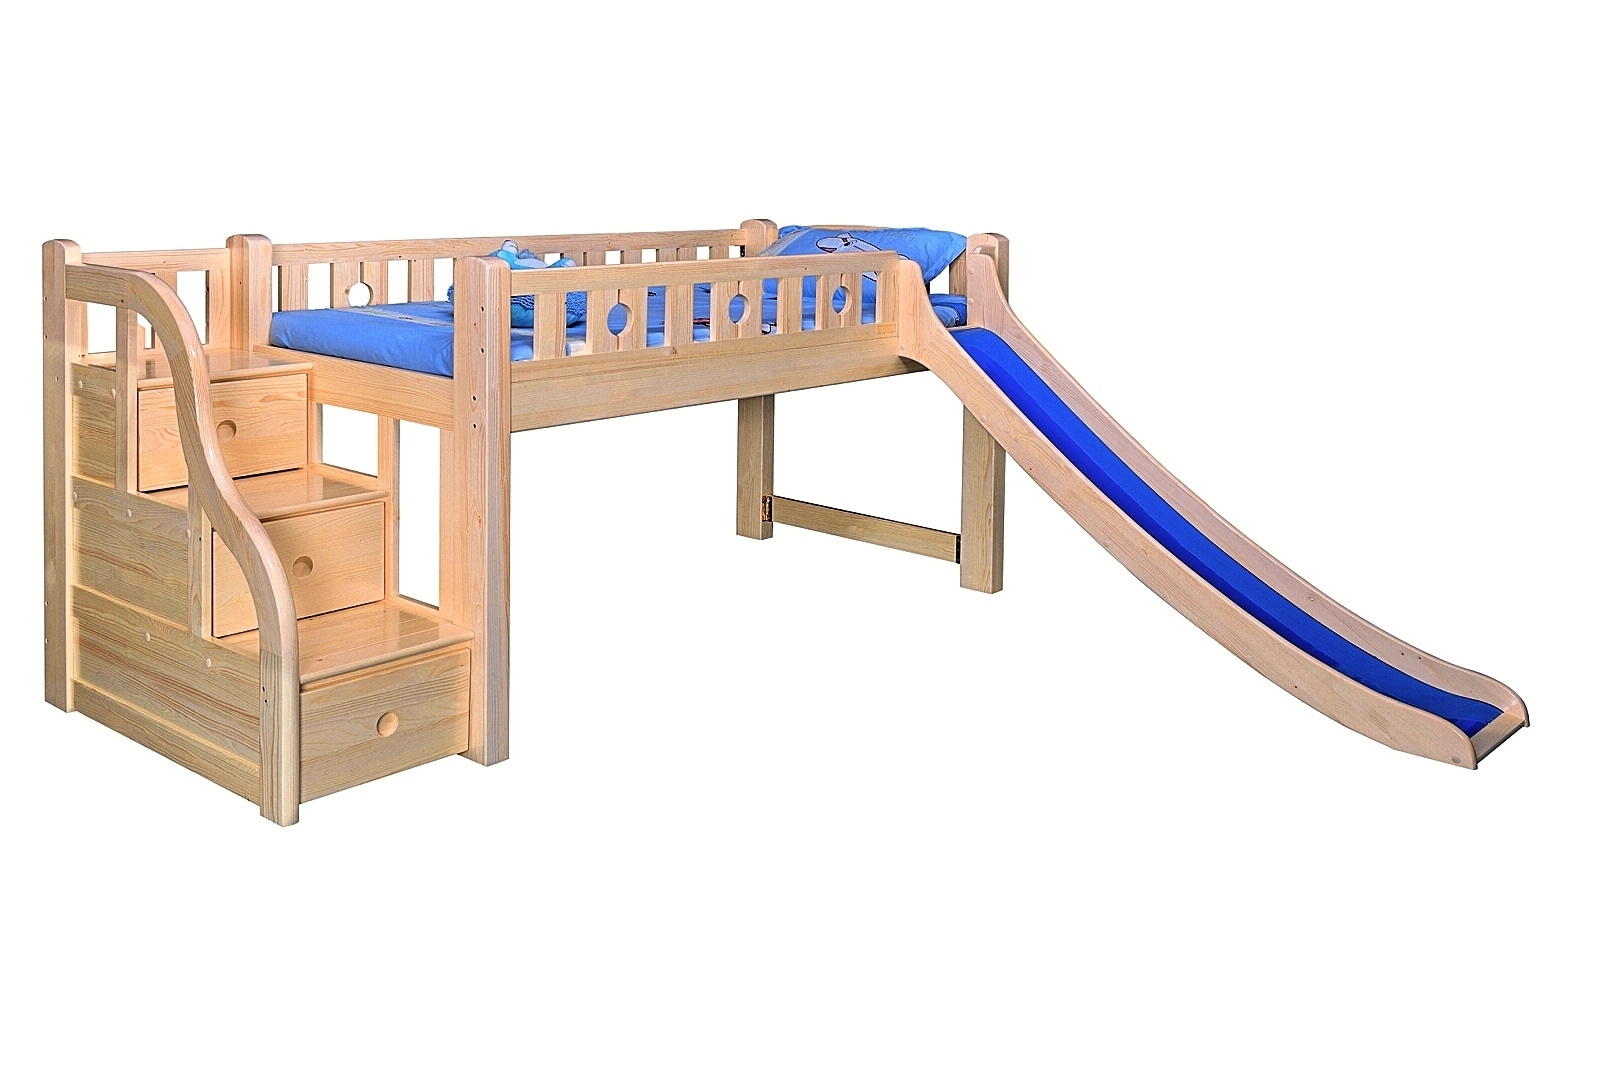 Timber Bunk Bed With Blue Slide, Childrens Bunk Beds Australia